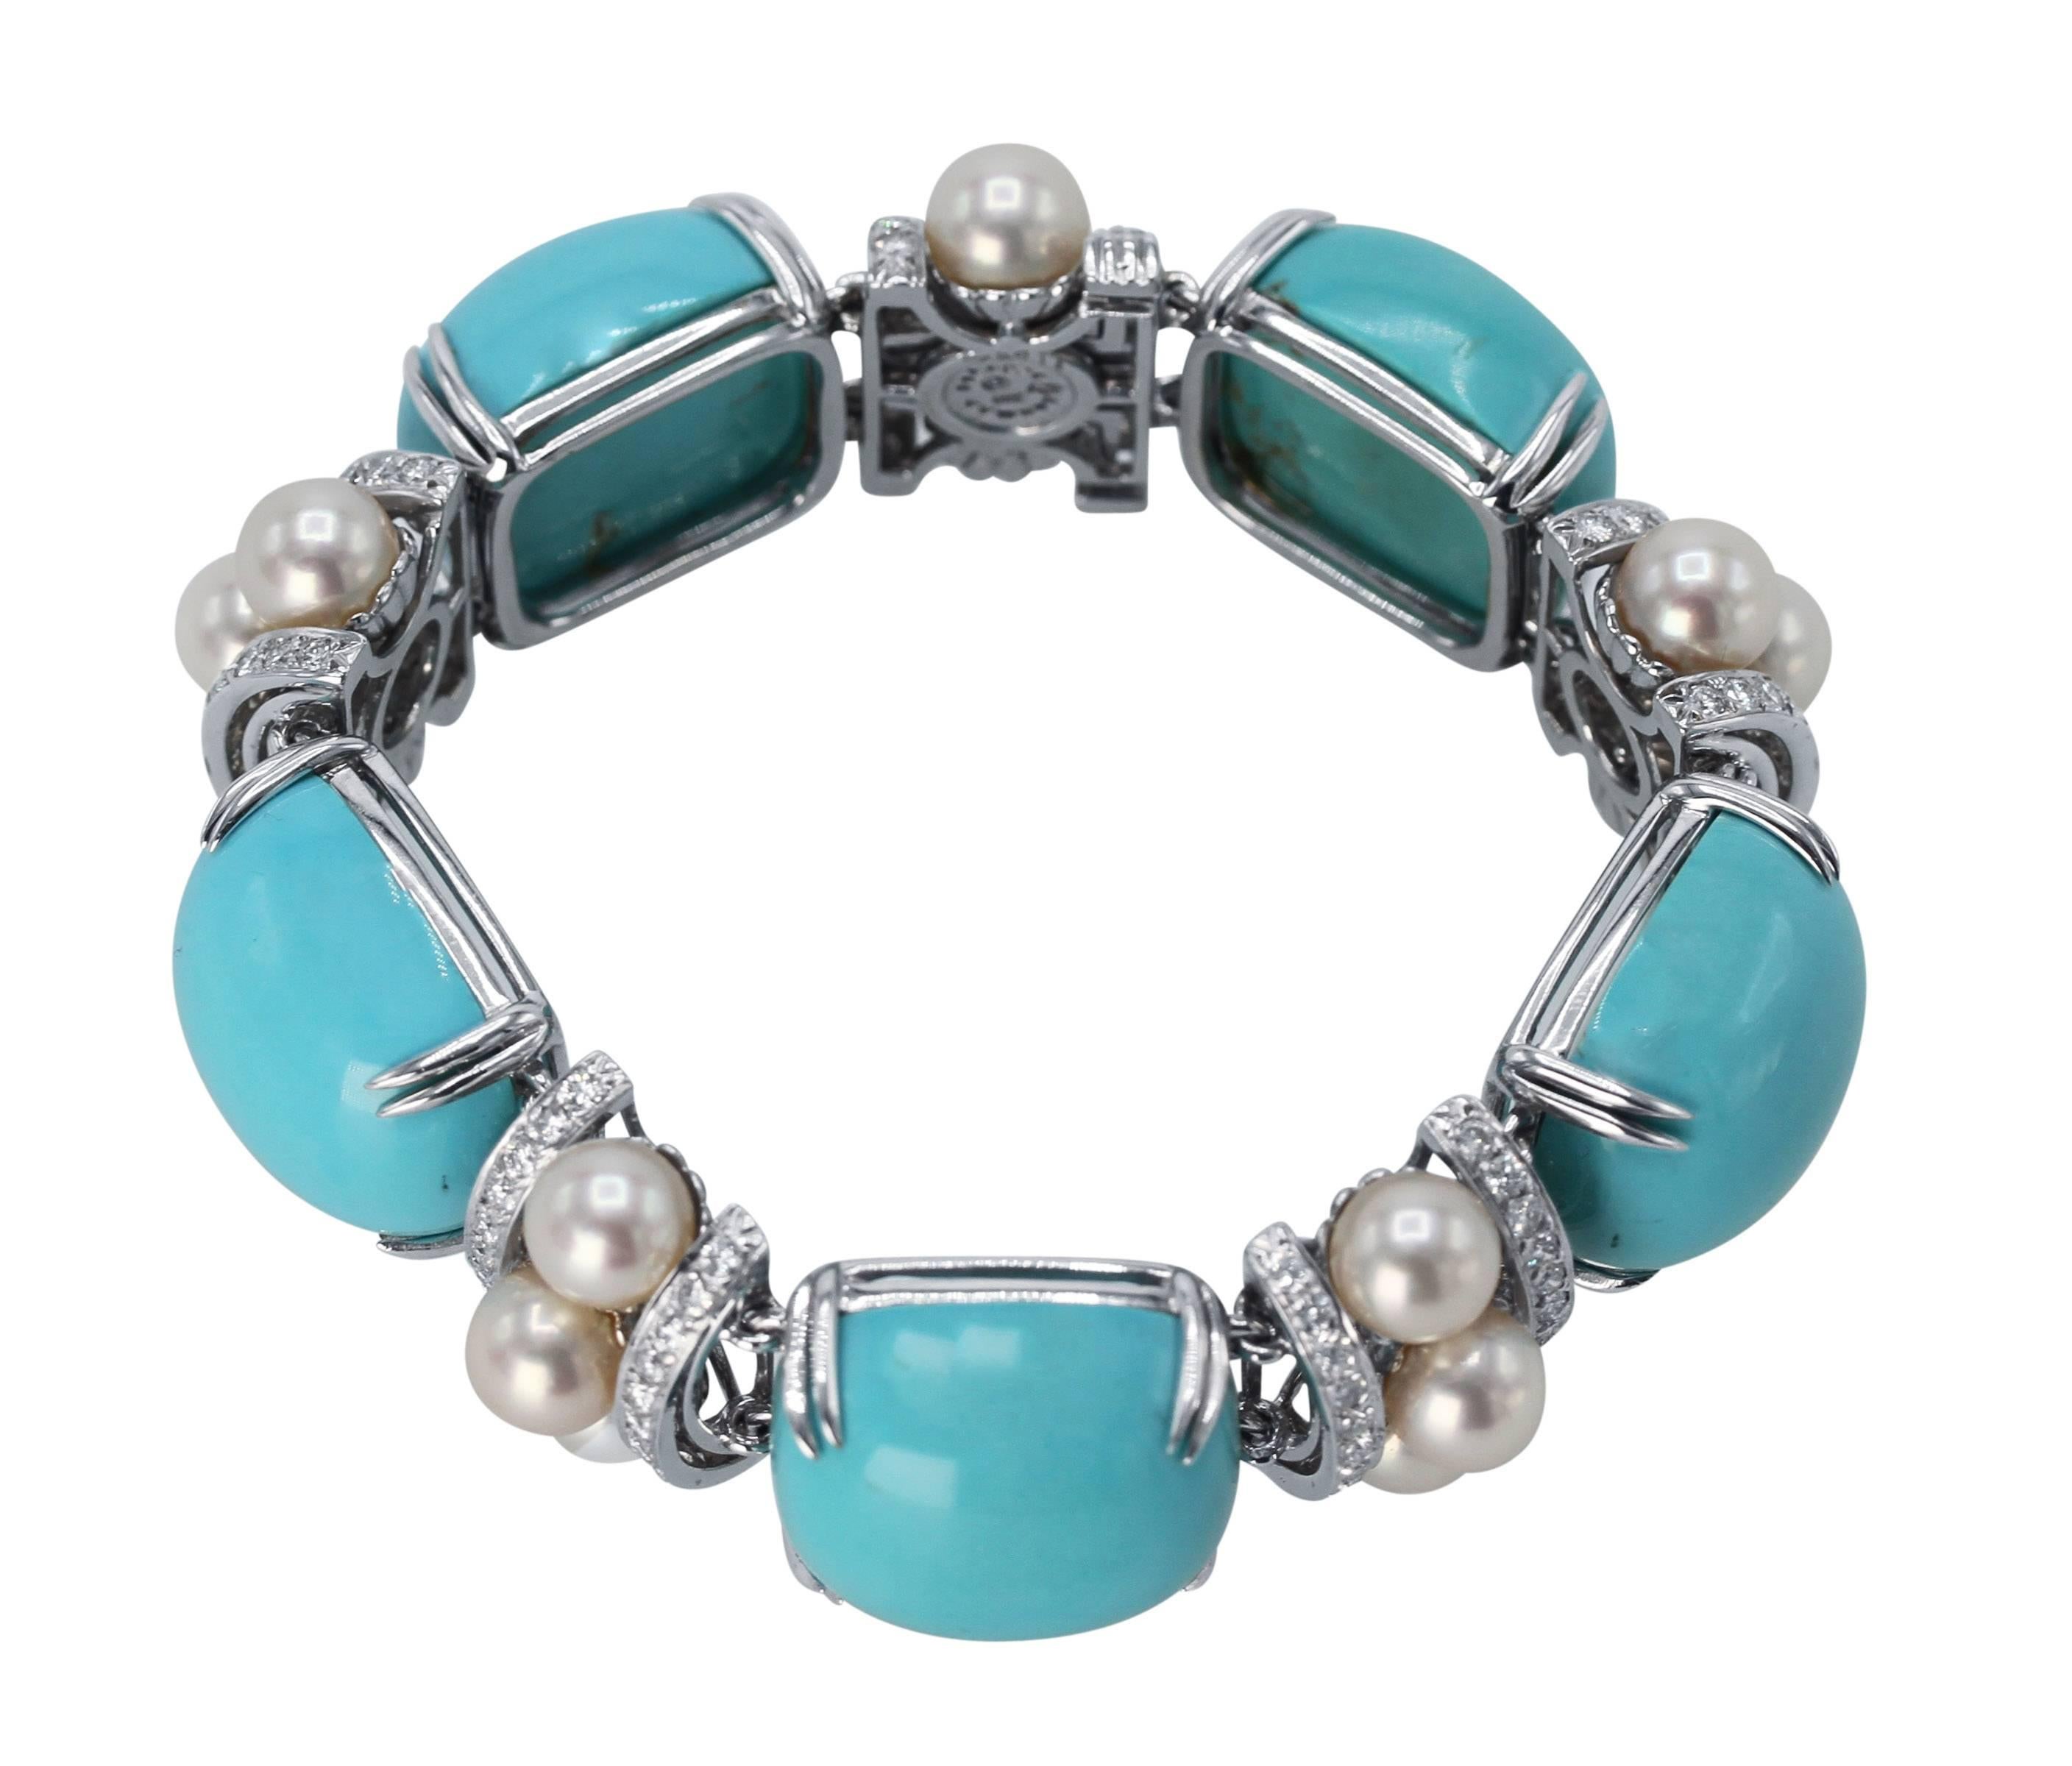 An 18 karat white gold, turquoise, cultured pearl and diamond bracelet by Seaman Schepps, set with 5 modified square-shaped cabochon turquoise measuring approximately 20.3 by 17.9 by 10.6 mm., spaced by curved links set with 108 round diamonds